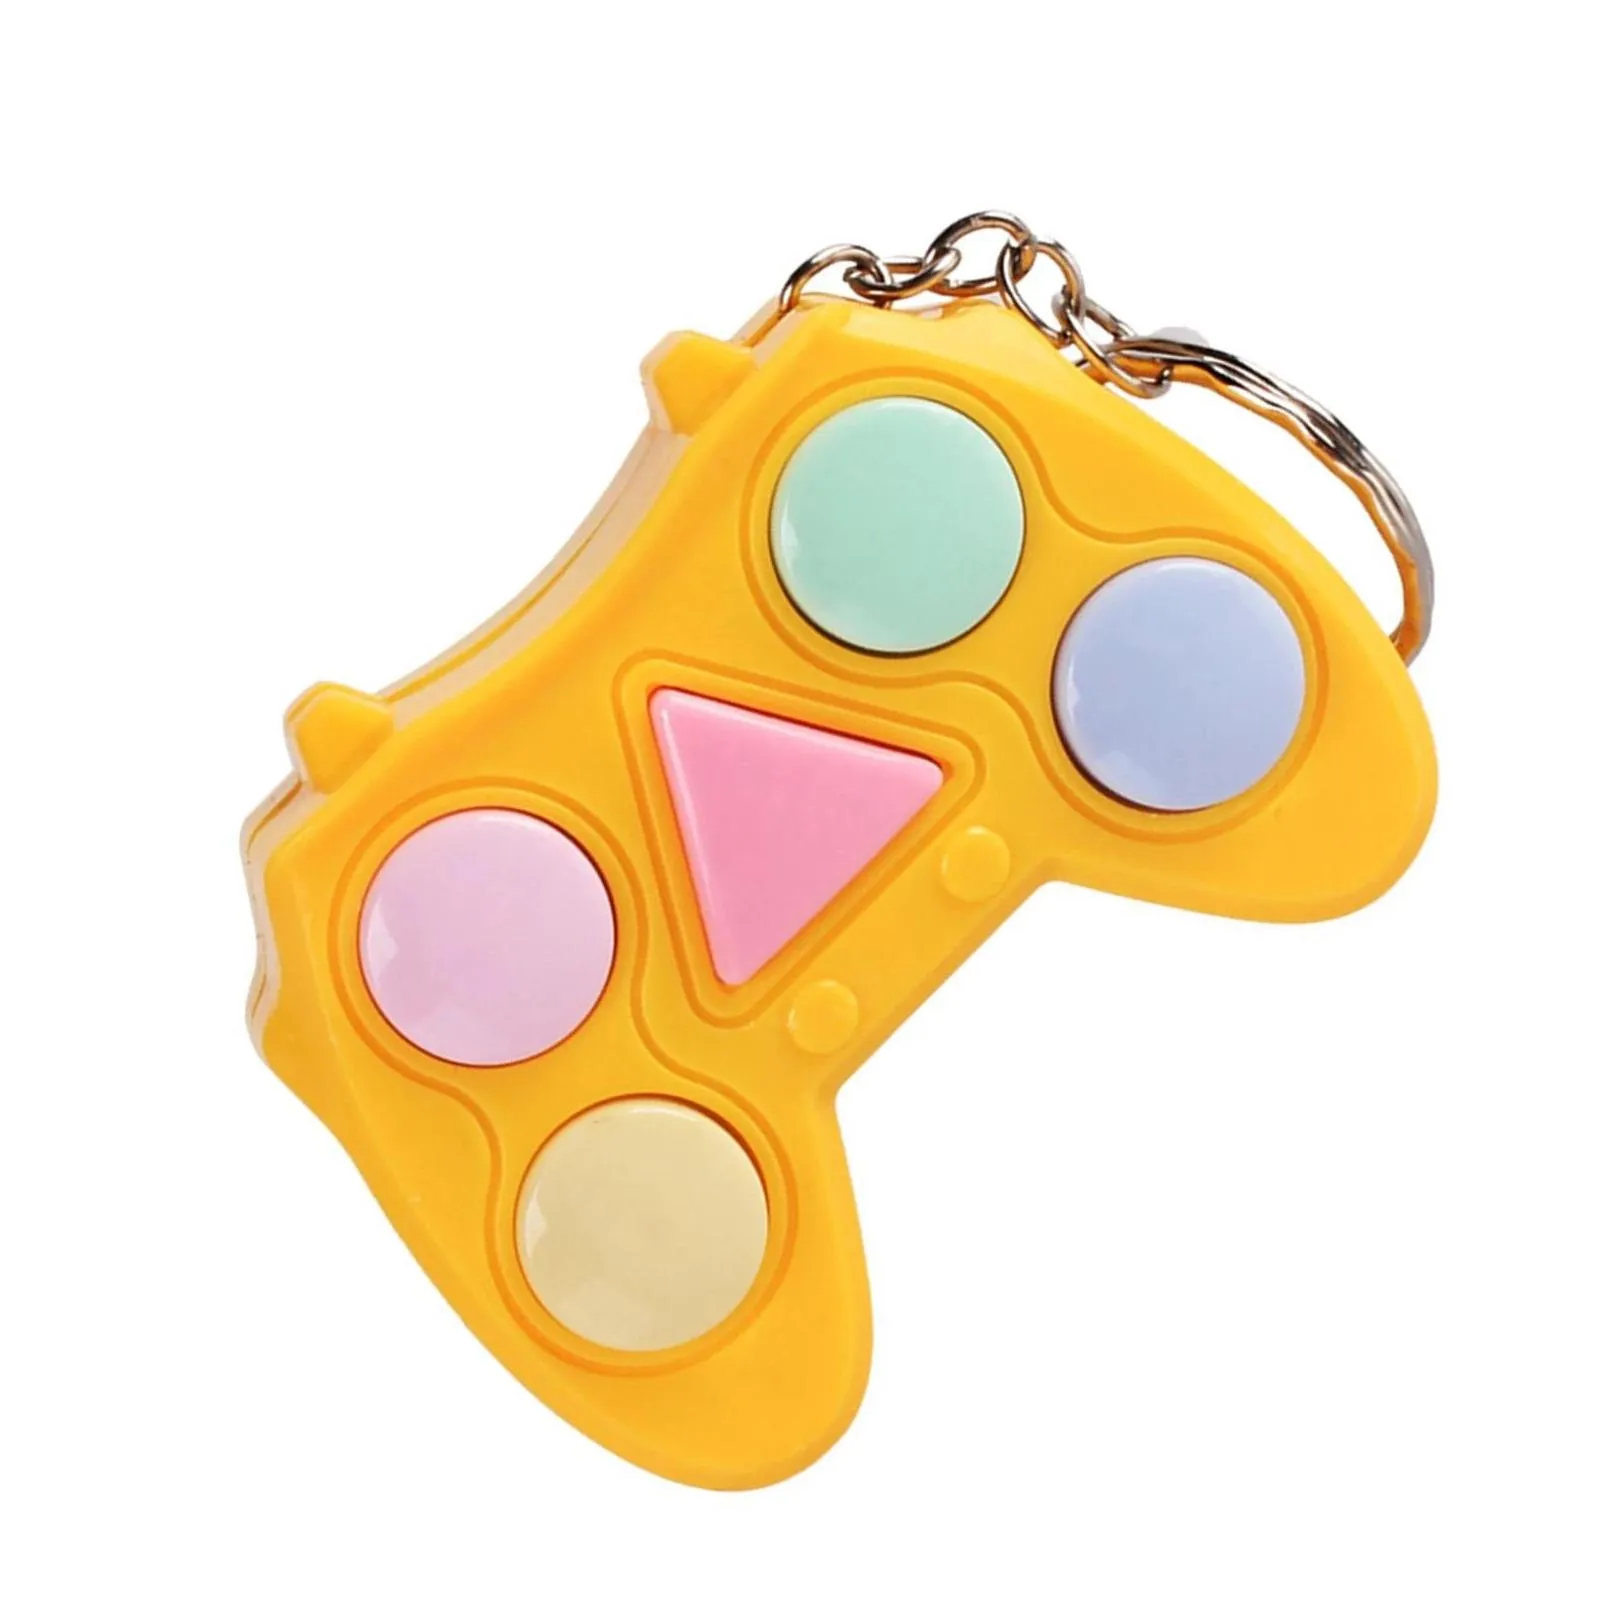 game handle fidget toys plastic reliever stress hand pad key mobile phone accessories decompression